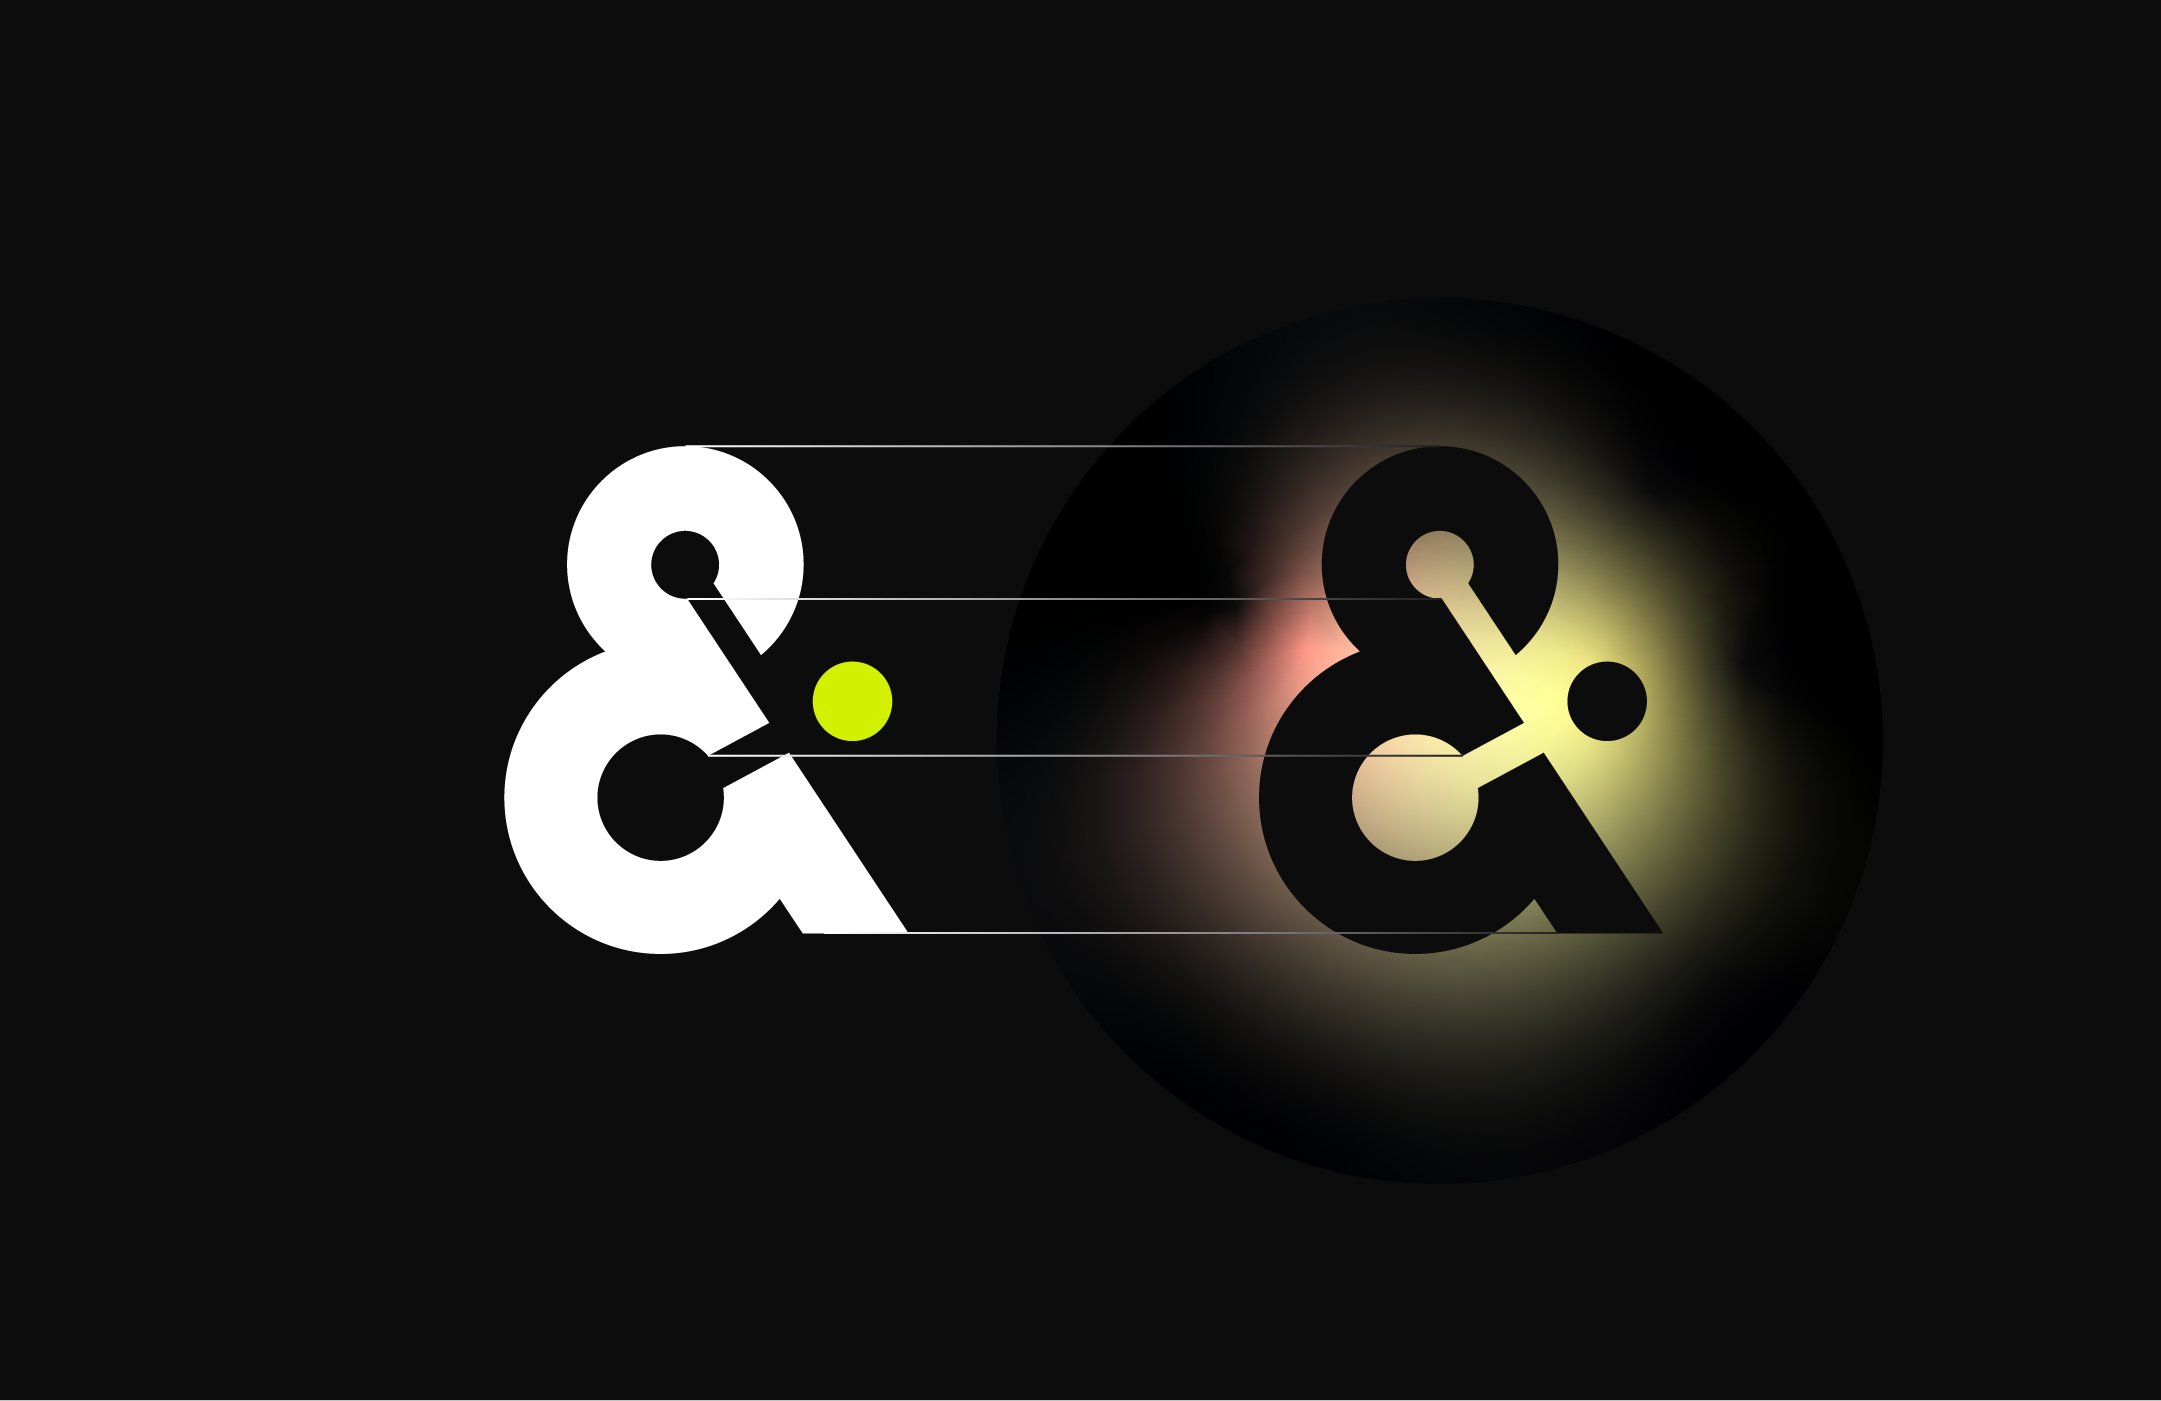 A pair of white and black Amperity logos